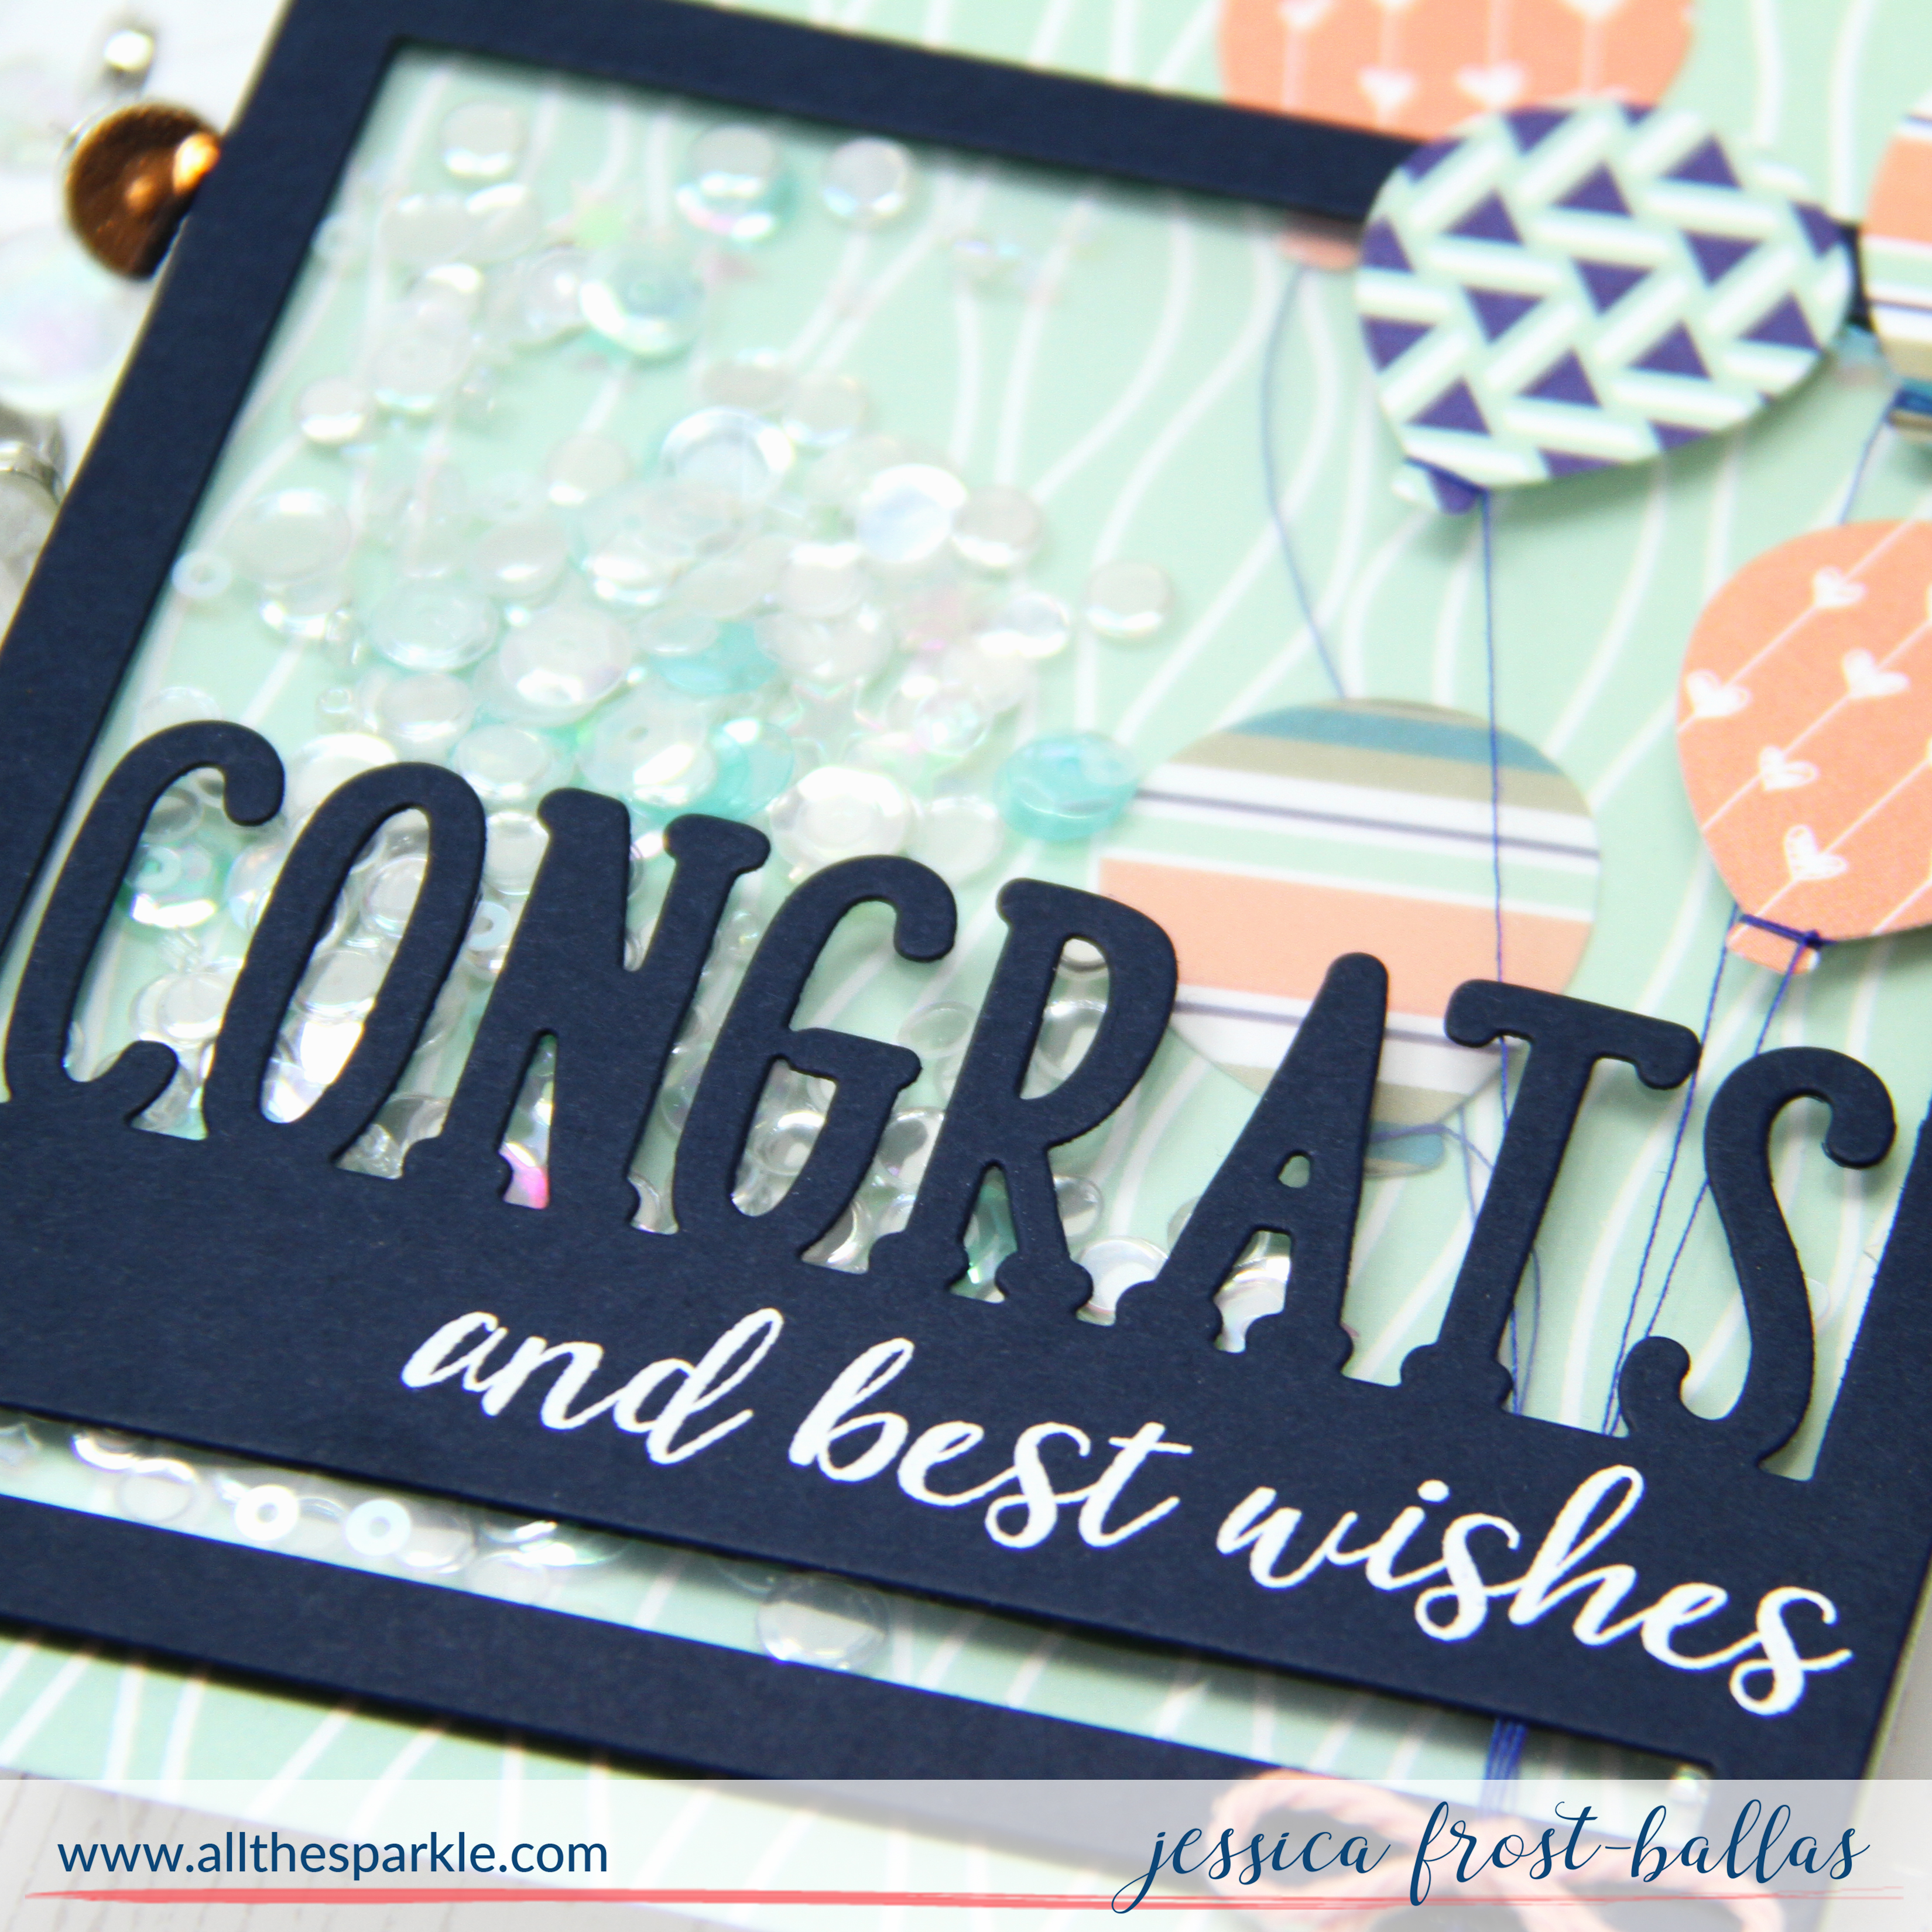 Congrats and Best Wishes for Reverse Confetti by Jessica Frost-Ballas